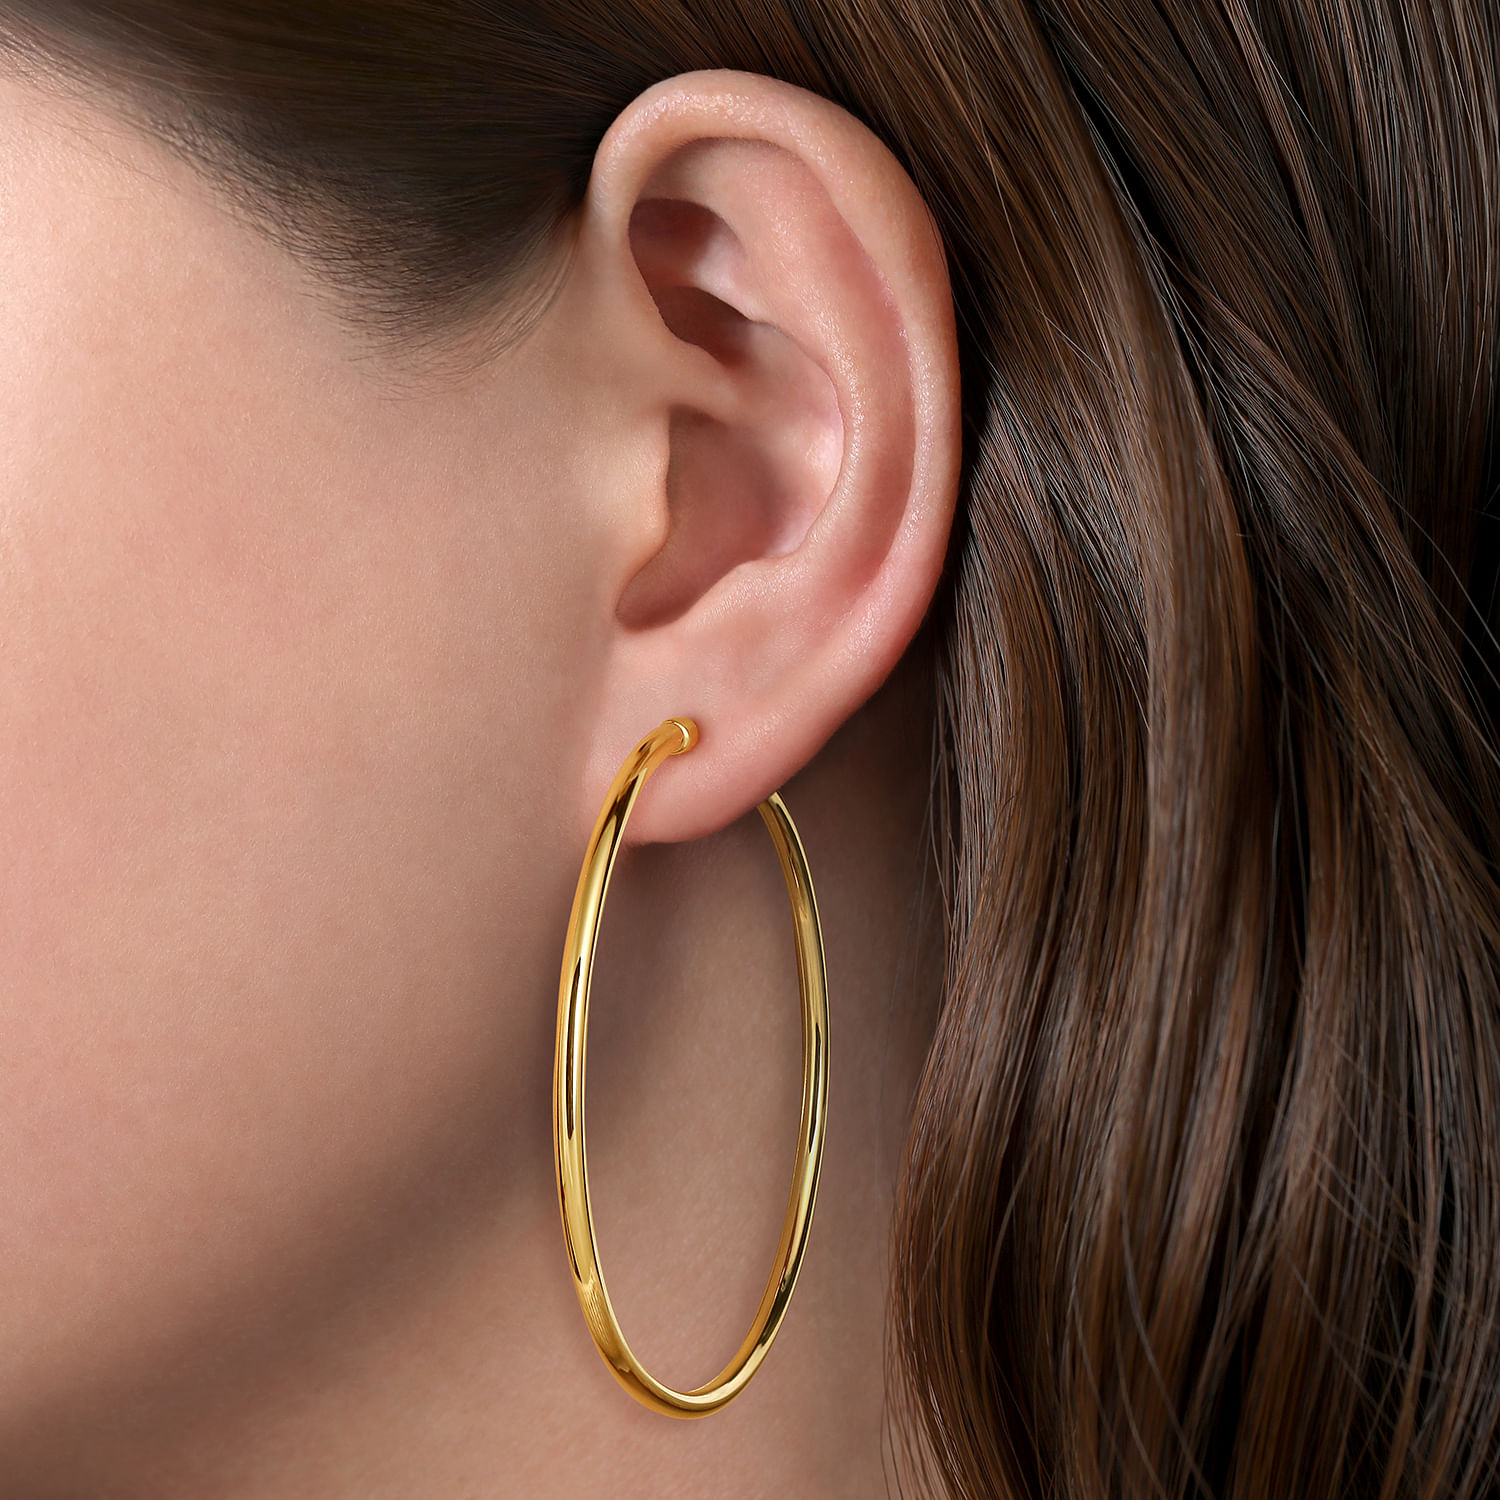 14K Yellow Gold 60mm Round Classic Hoop Earrings